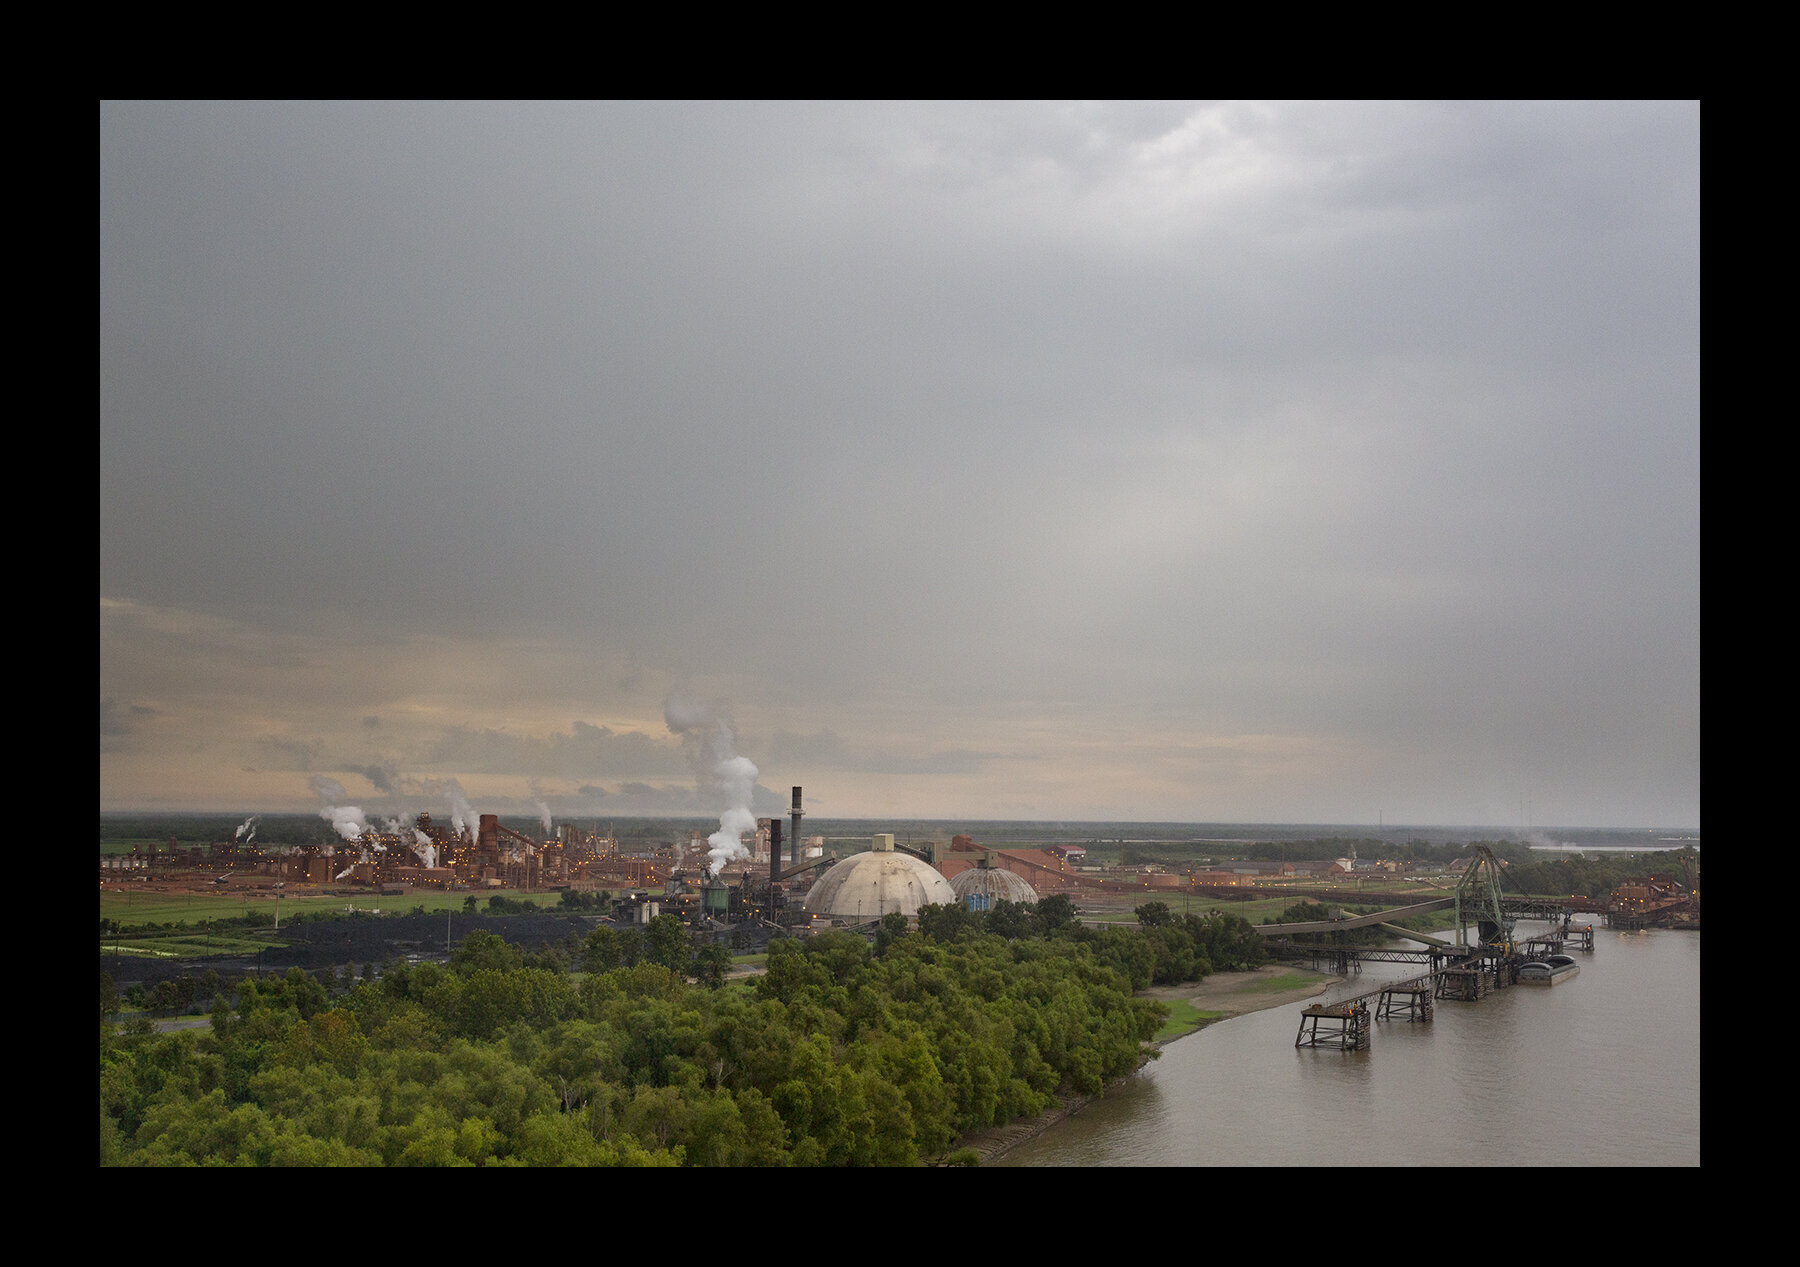  Petrochemical facilities along the Mississippi River in Louisiana, known as "cancer alley" or "death alley." Over 200 of these industrial facilities have polluted the local environment for decades. Cancer, asthma and other ailments are some of the h